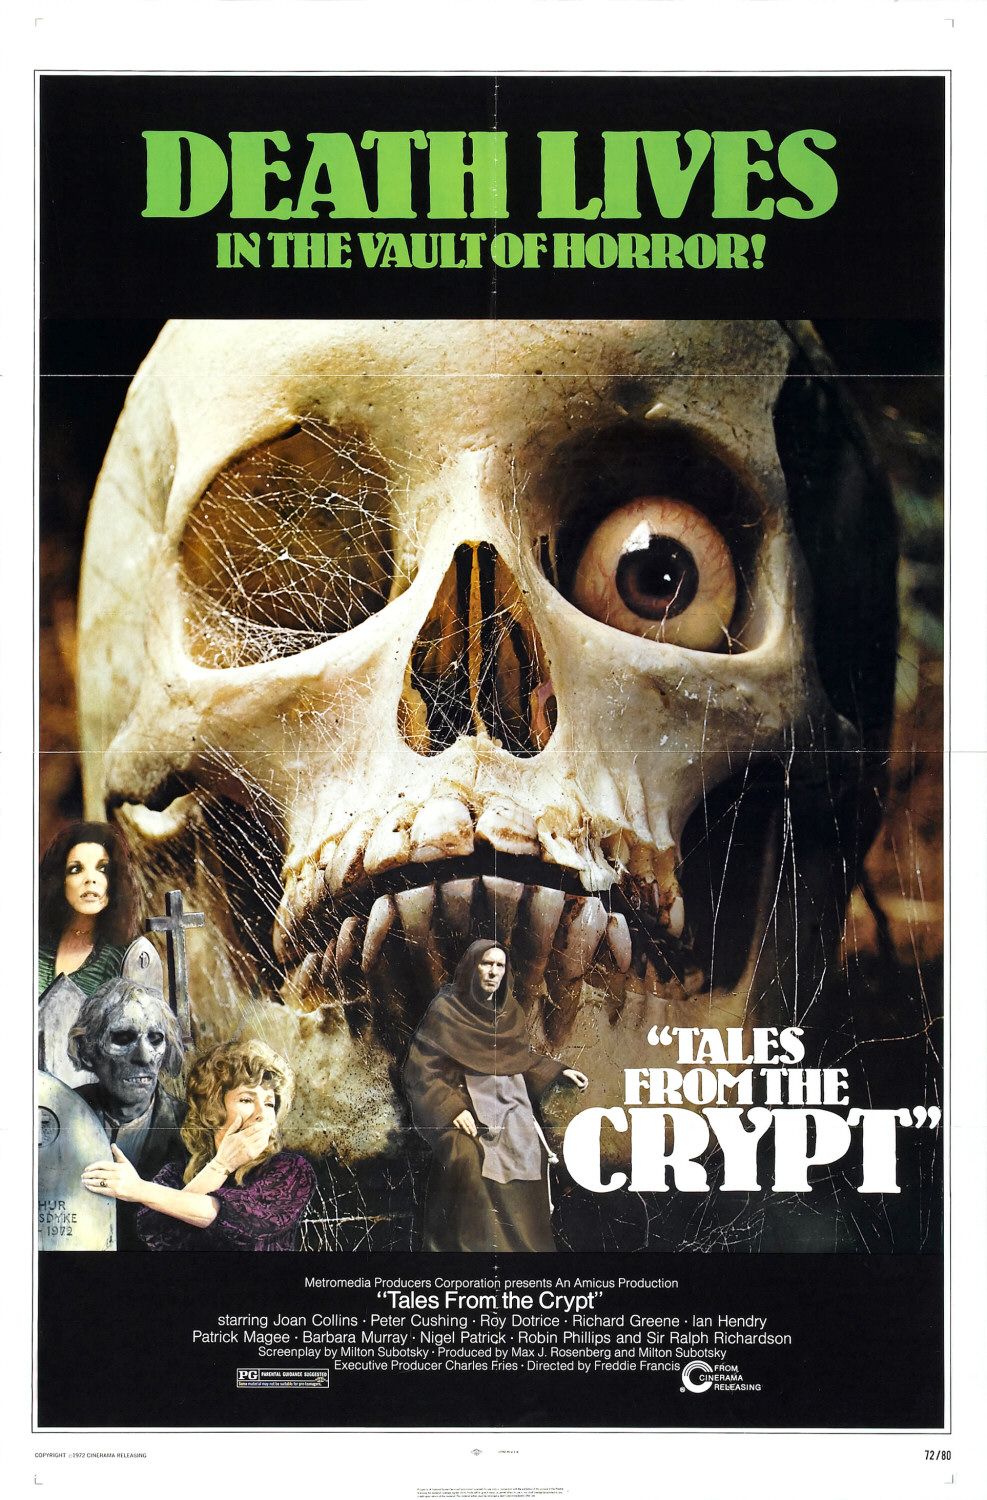 Tales from the Crypt: Extra Large Movie Poster Image - Internet Movie